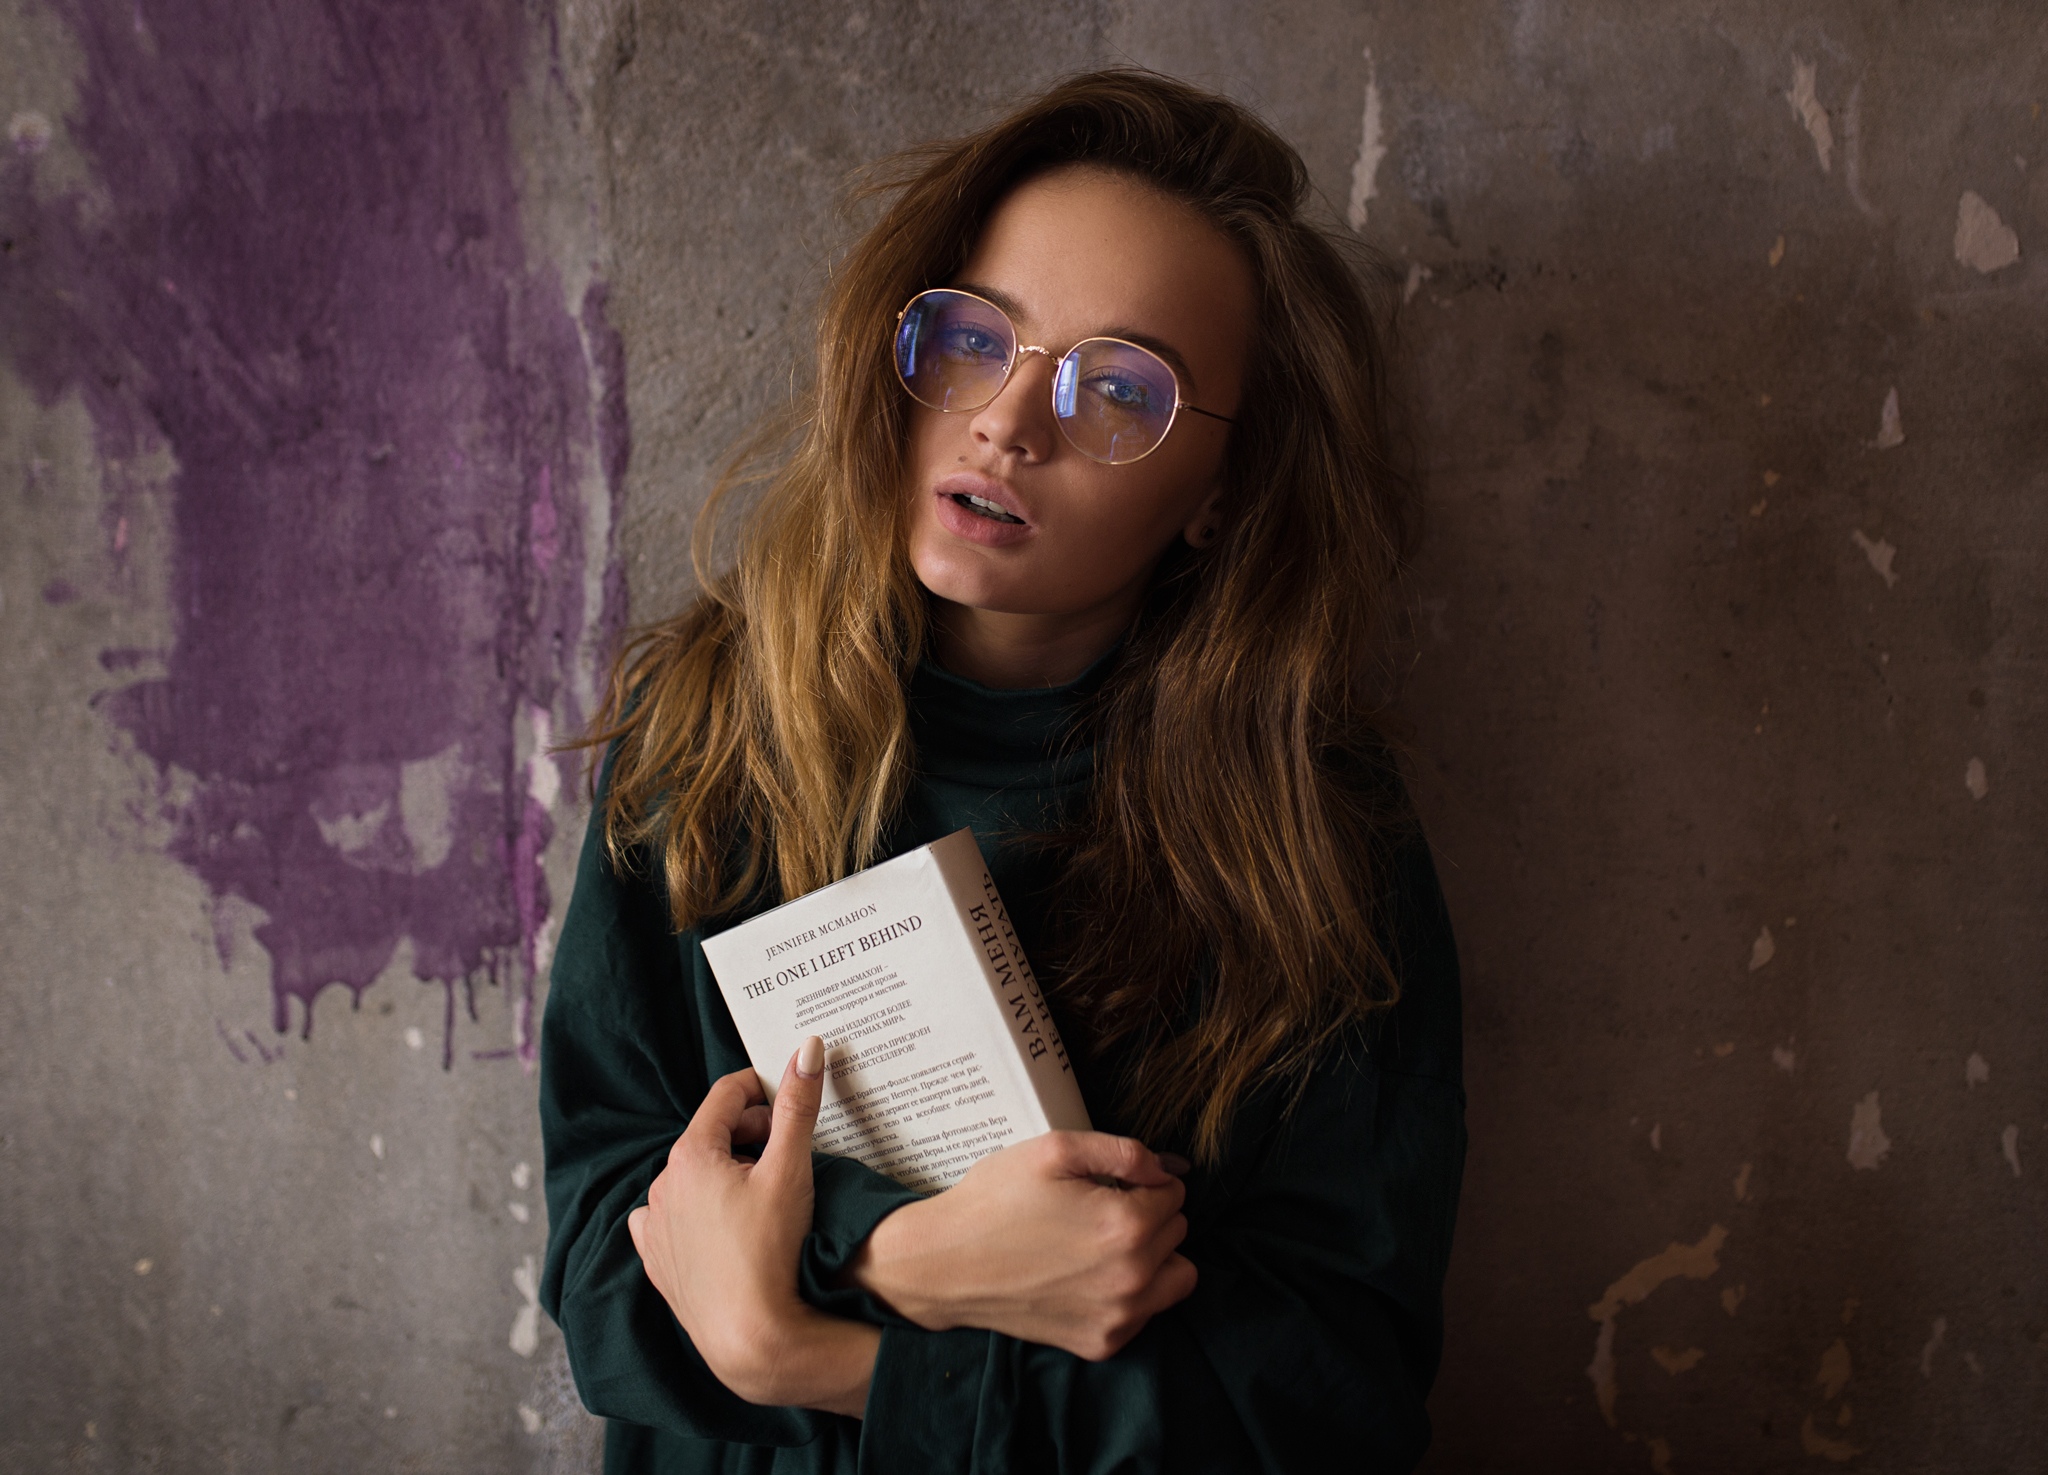 Women Model Brunette Indoors Looking At Viewer Women With Glasses Glasses Sweatshirts Books Wall Por 2048x1475